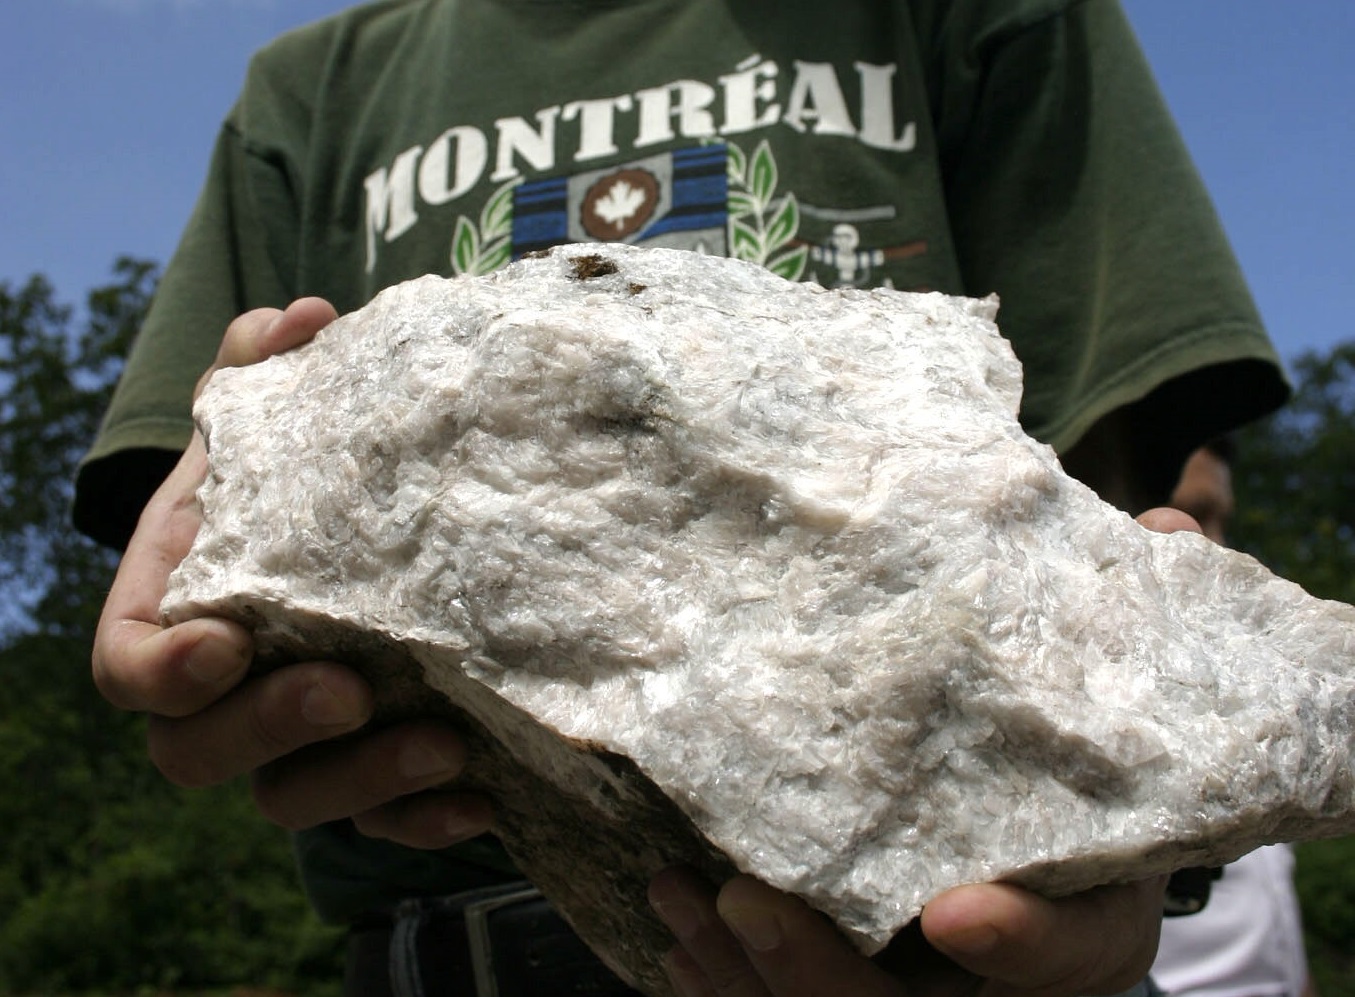 A barite rock from an open-cut mine in Chicomuselo, the Blackfire operation site. August 27, 2008.